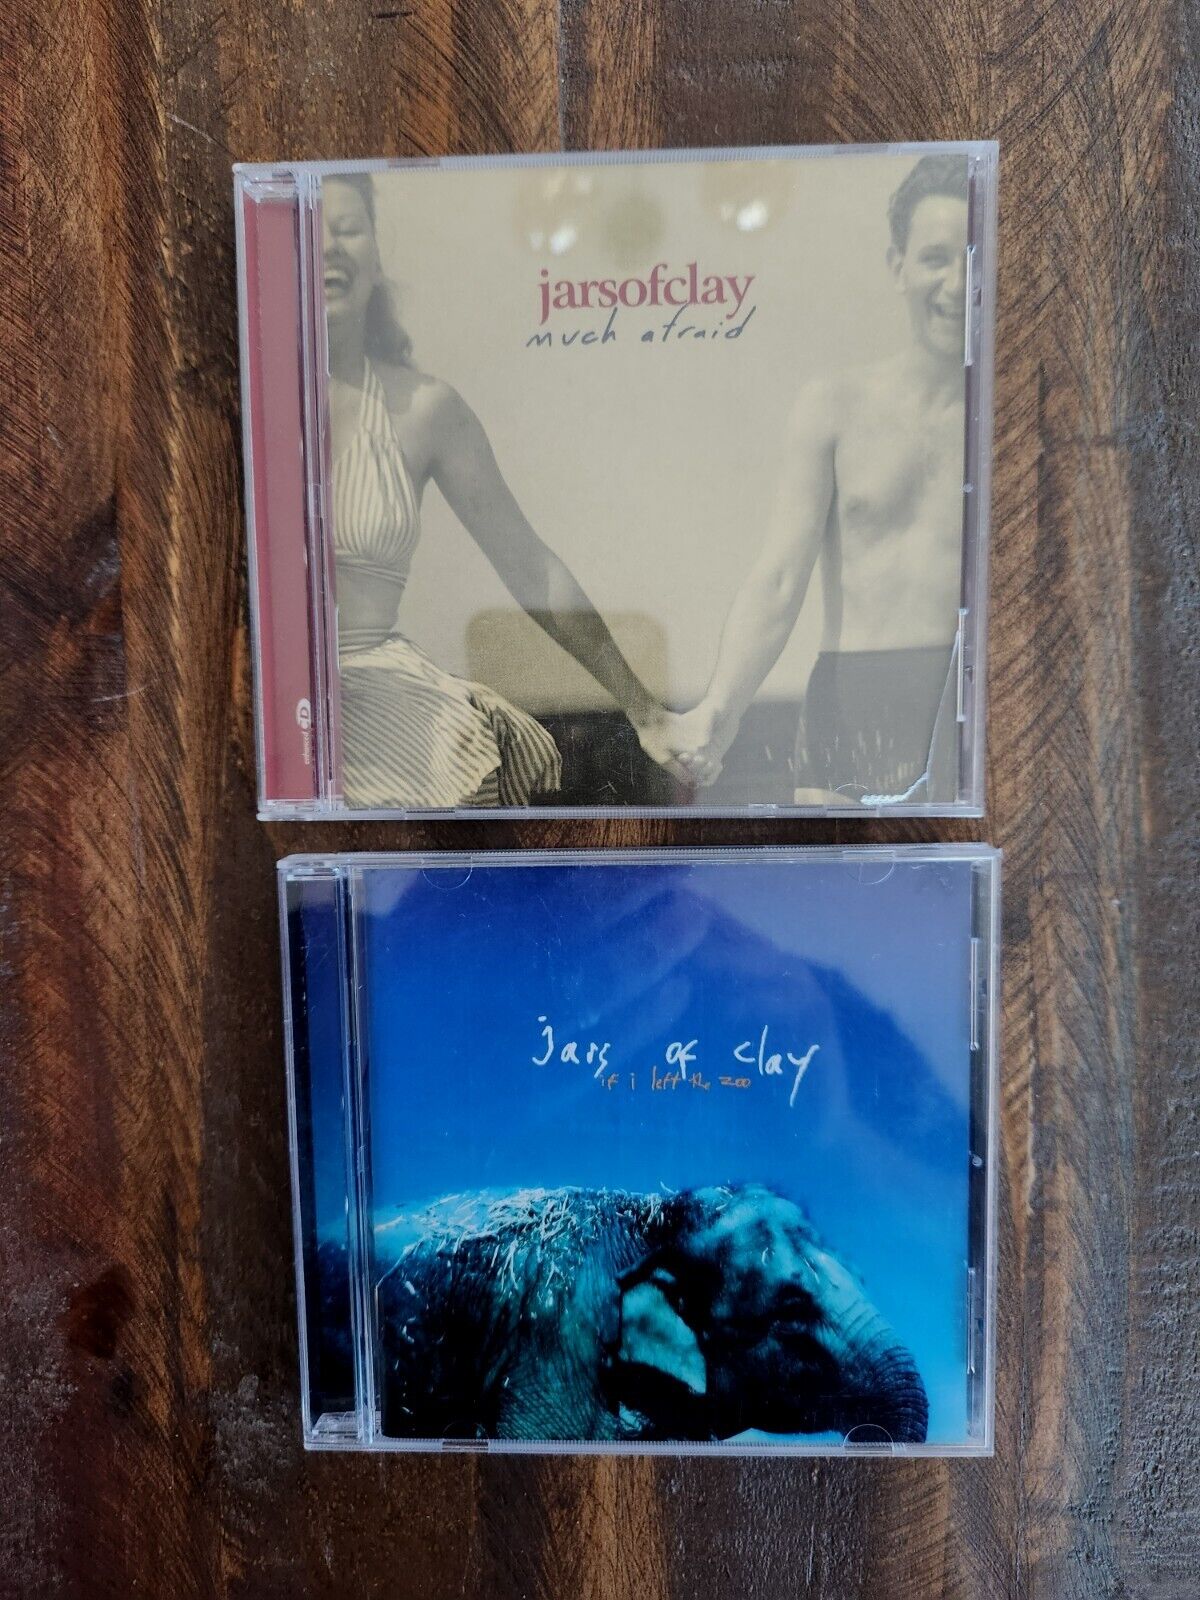 Jars of Clay 2 CD Lot-Much Afraid (1997) If I Left the Zoo (1999) EX cond CCM 